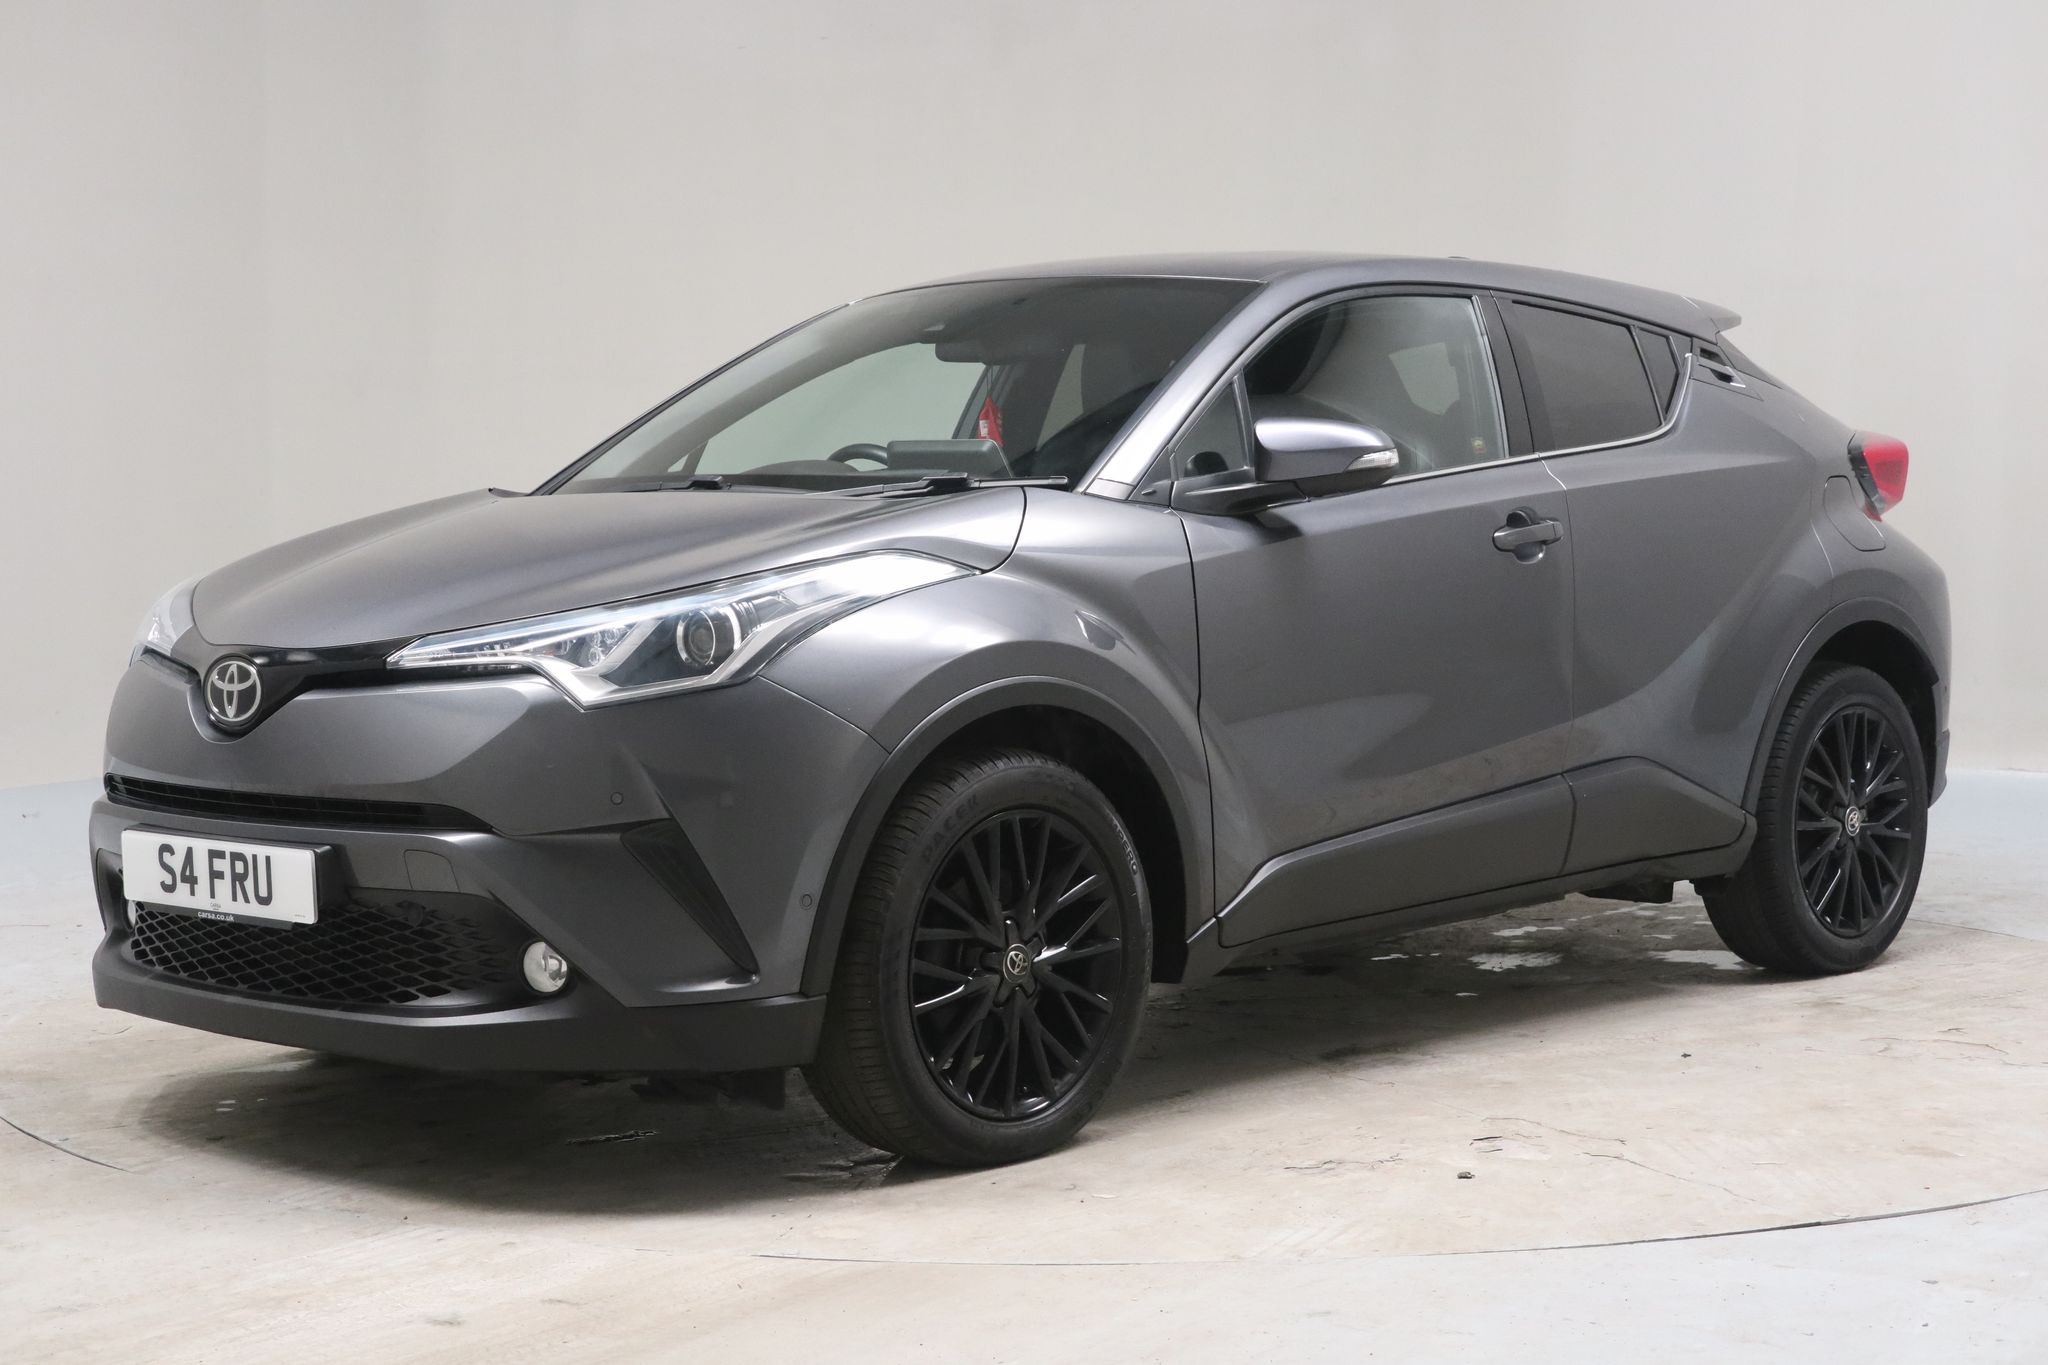 2018 used Toyota C-HR 1.2 VVT-i Excel (115 ps)